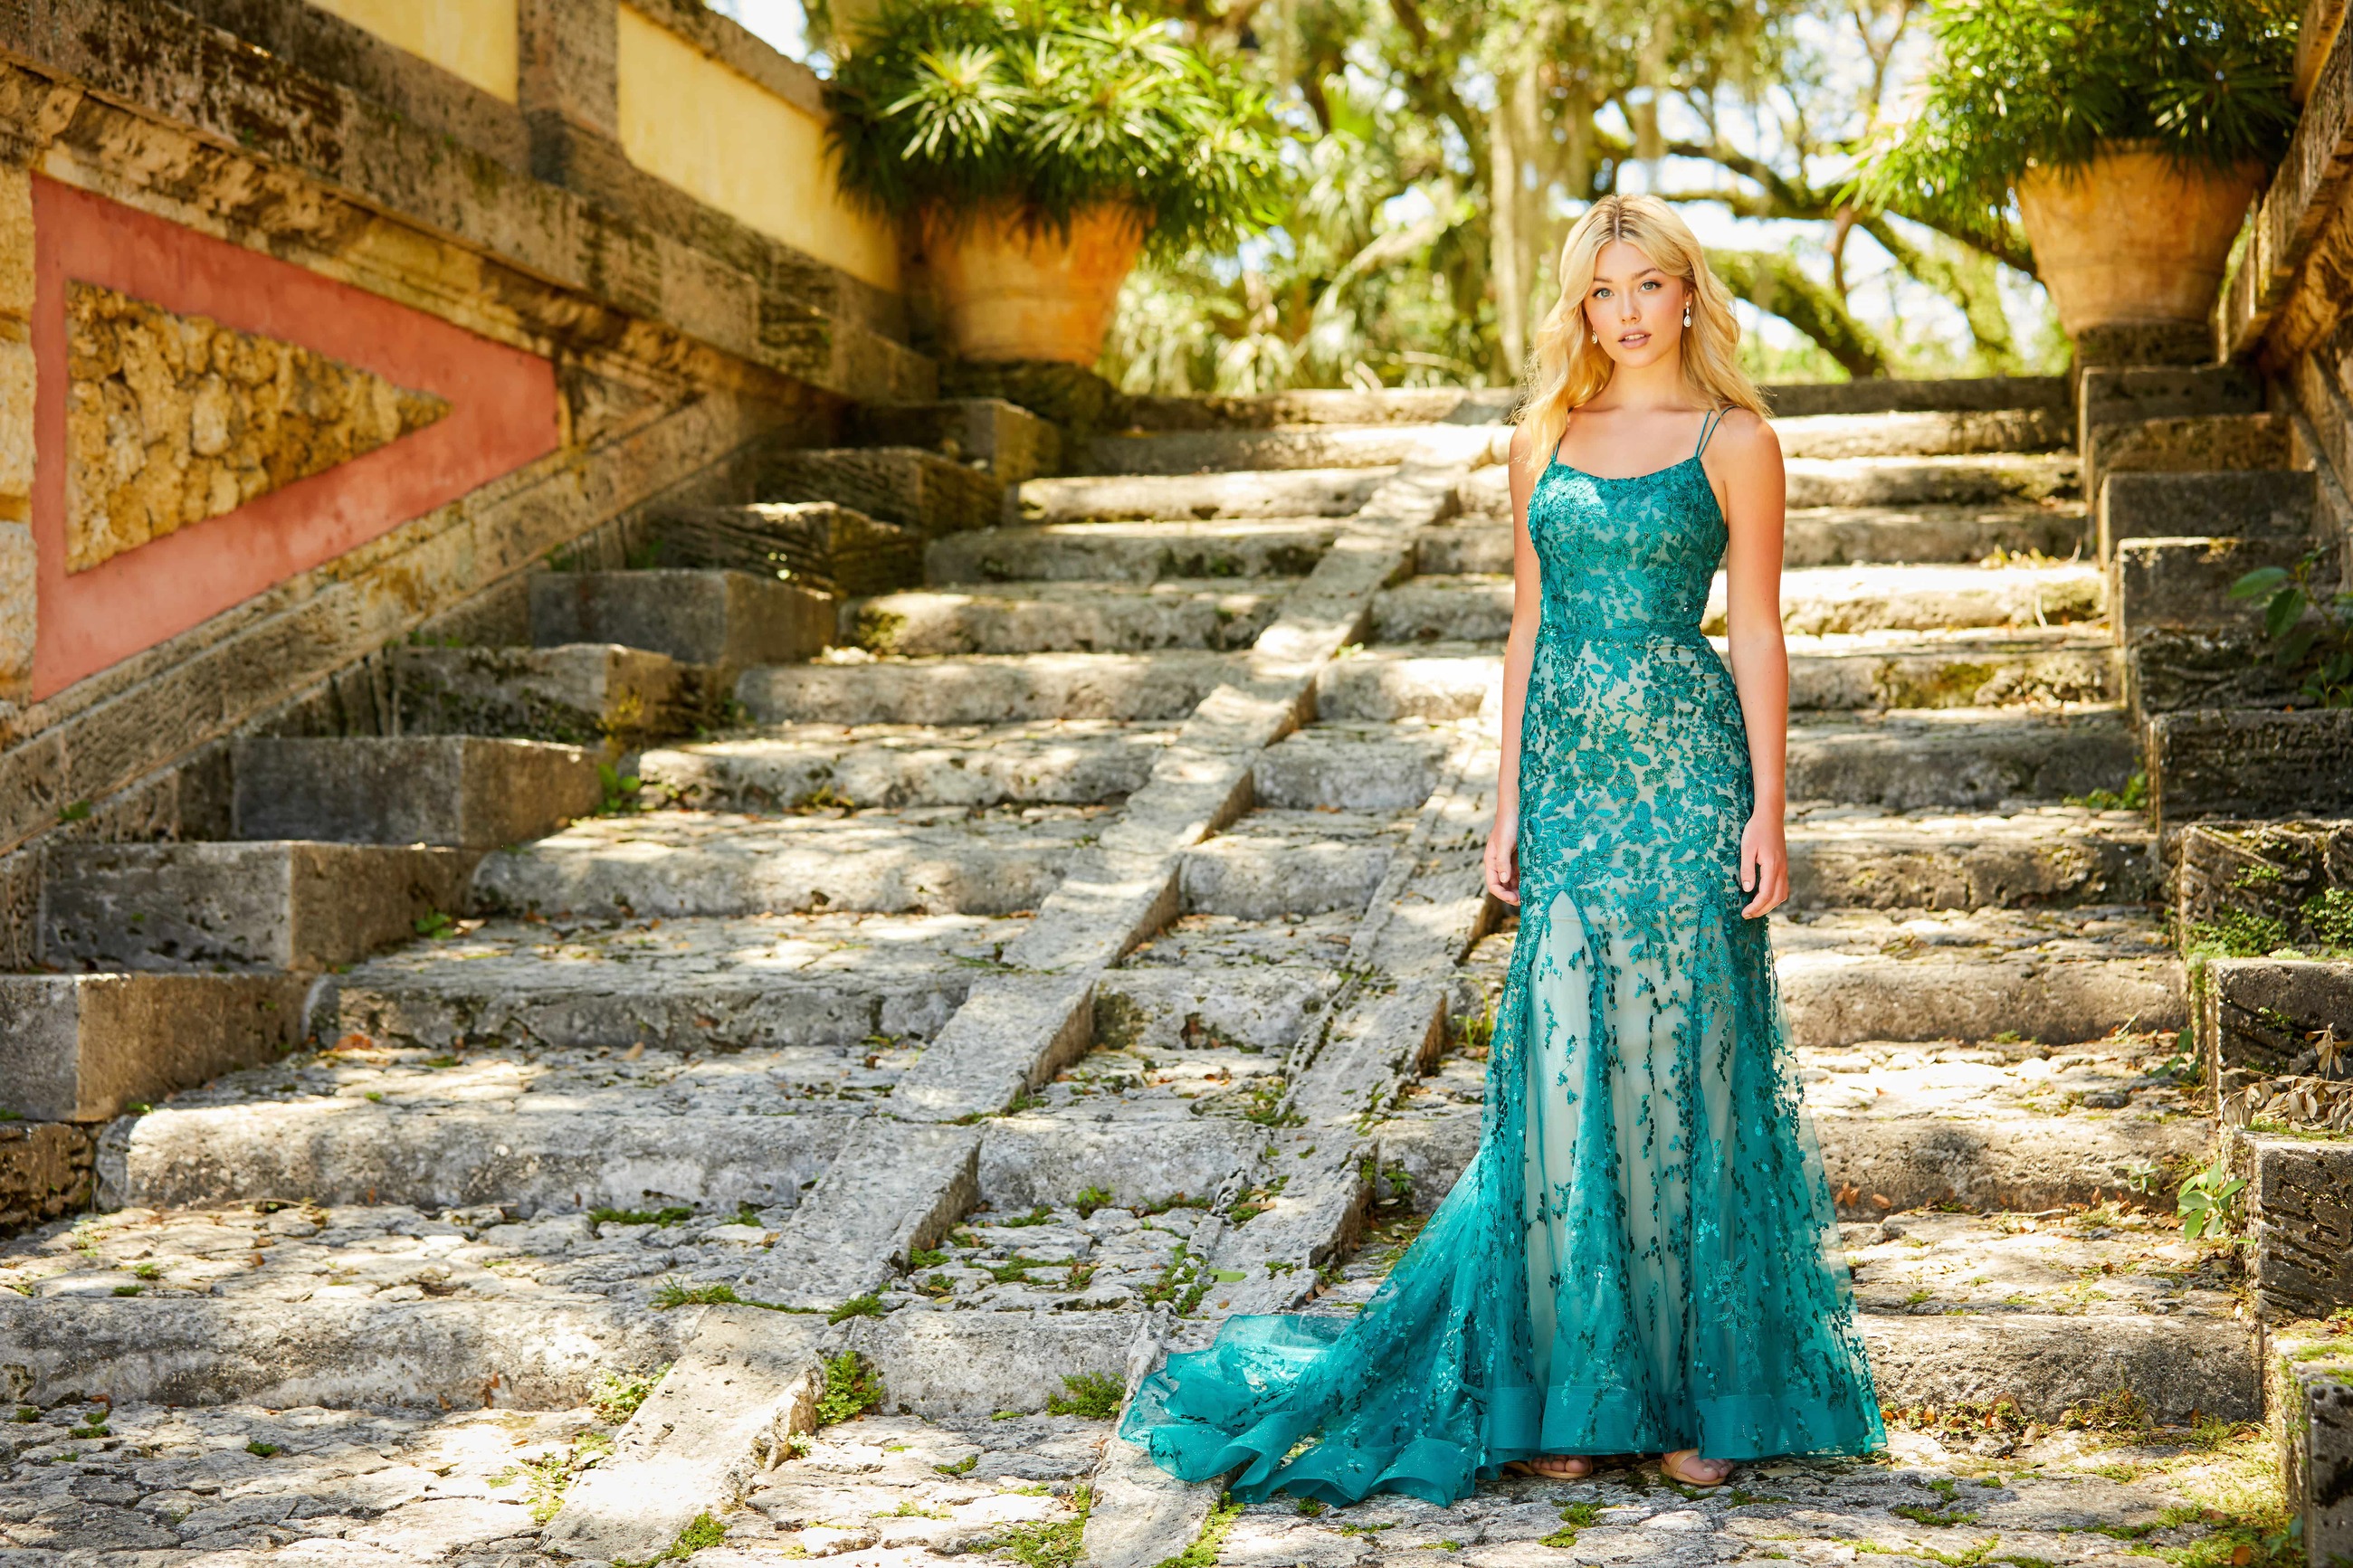 Blonde girl wearing long green dress in front of ancient steps. Front